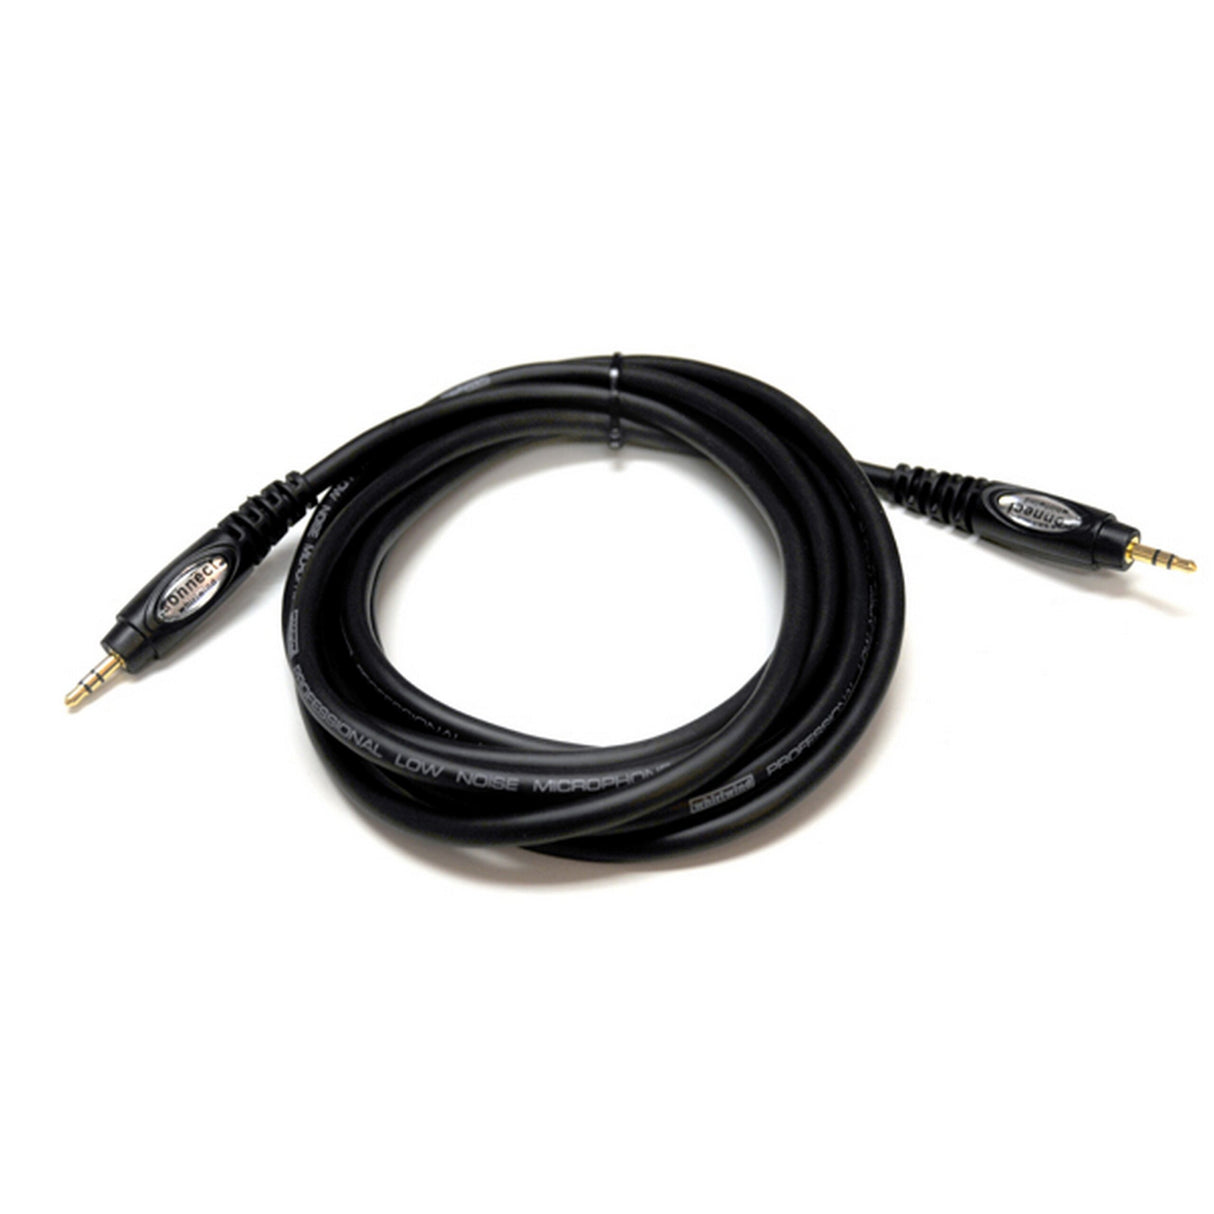 Whirlwind MST02 3.5mm TRS to 3.5mm TRS Cable, 2-Foot